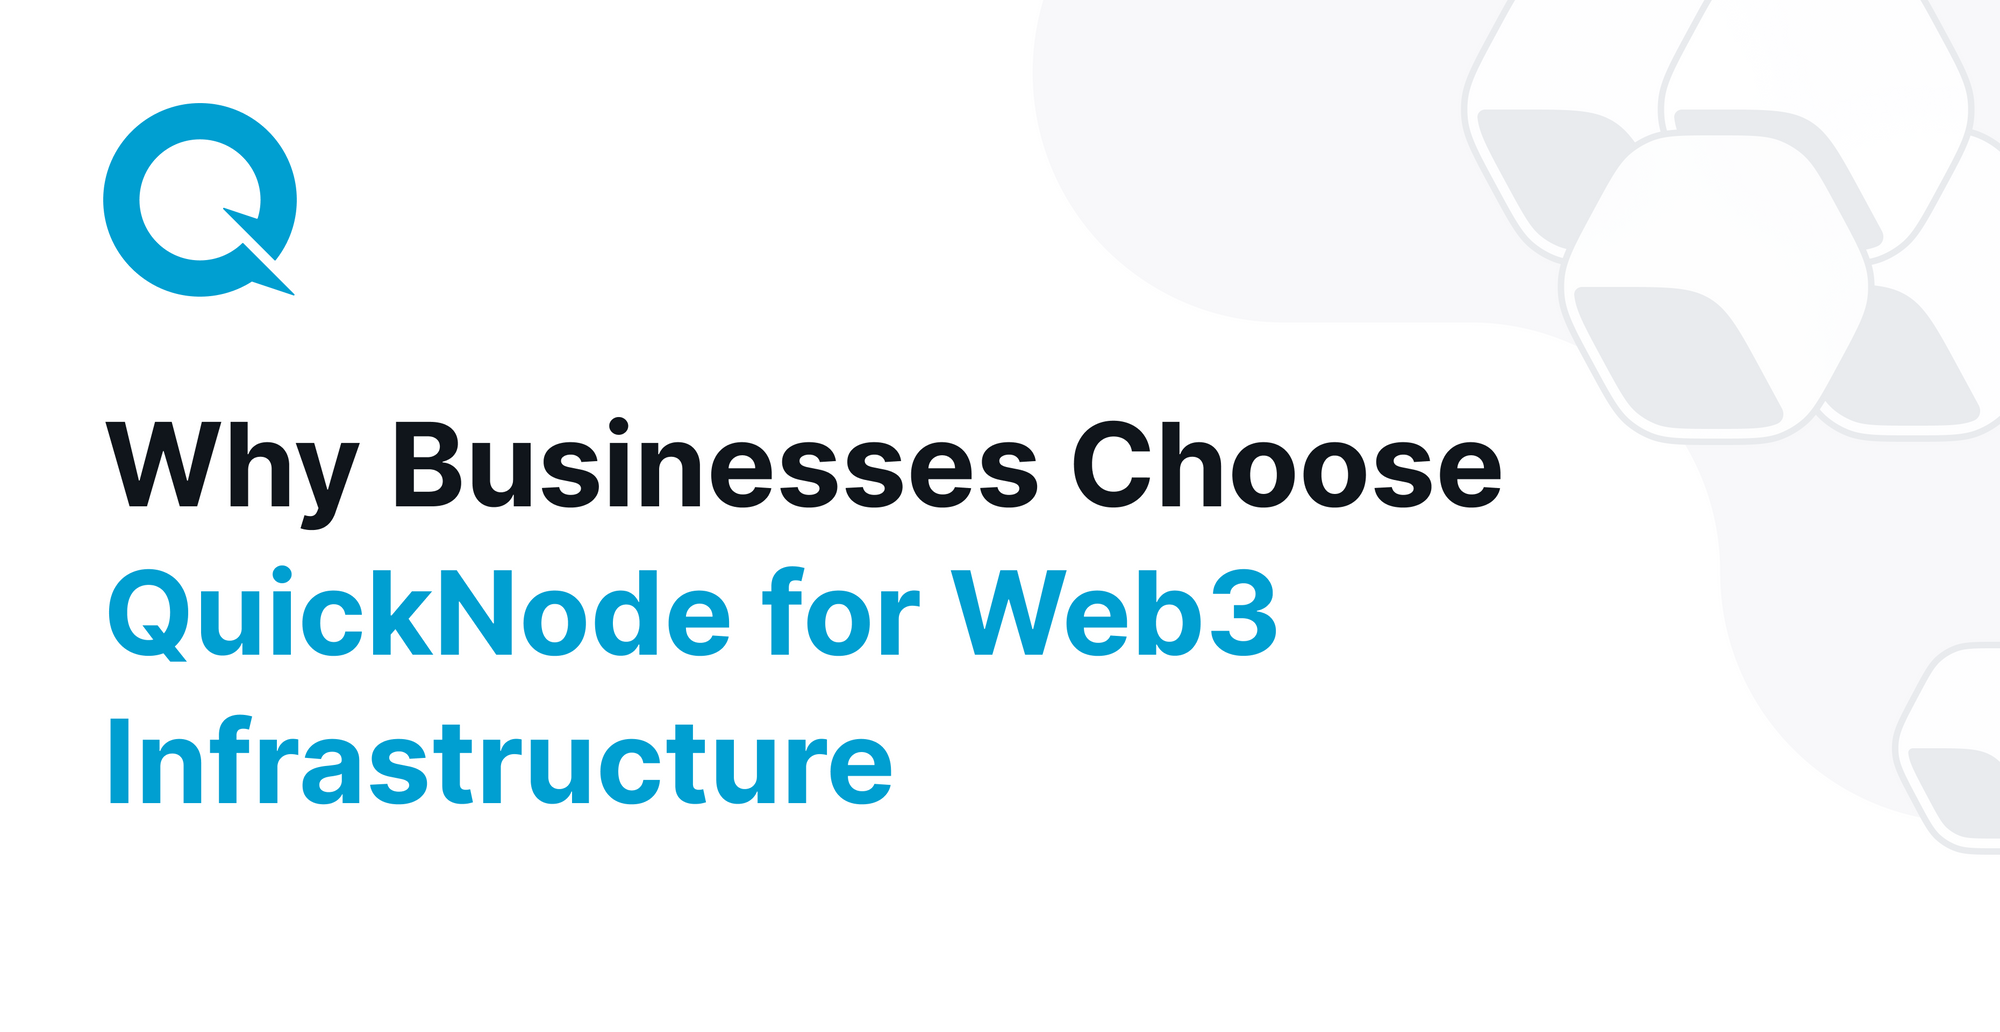 Why Businesses Choose QuickNode for Web3 Infrastructure